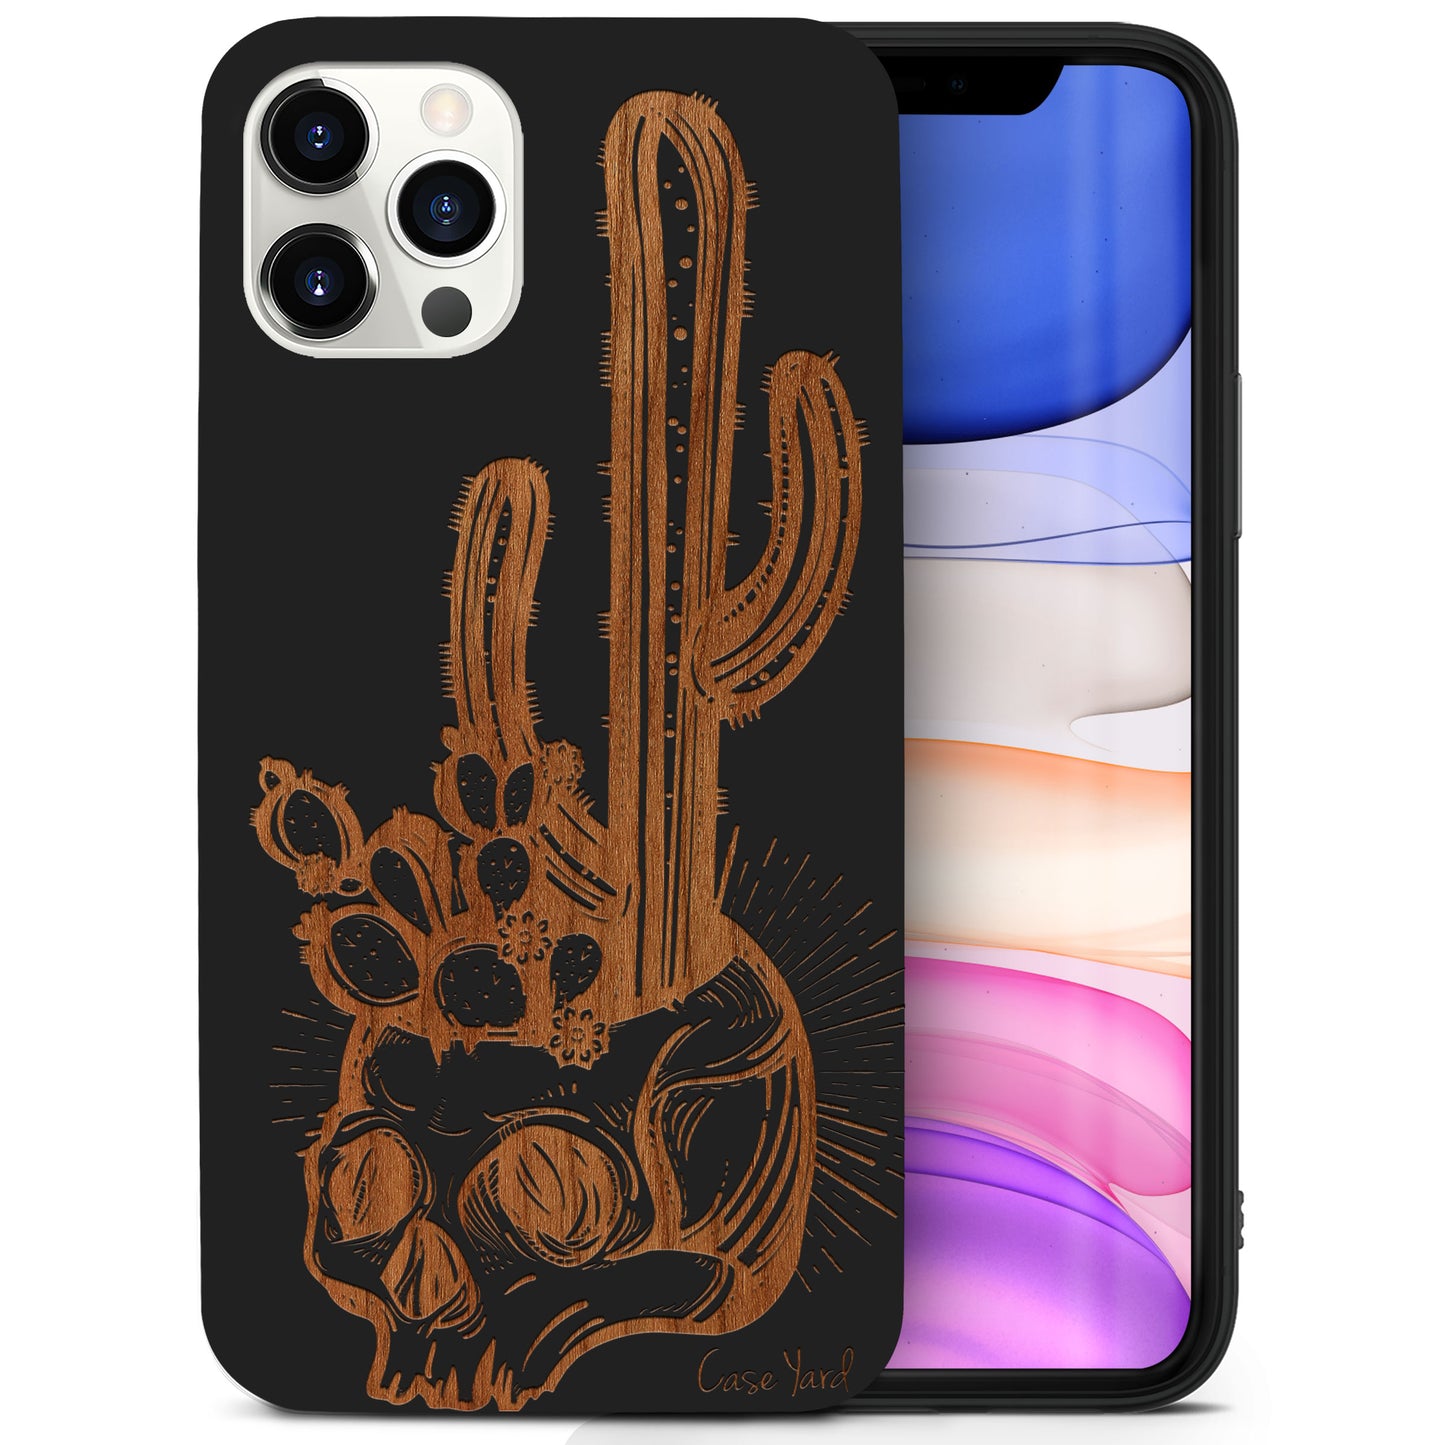 Wooden Cell Phone Case Cover, Laser Engraved case for iPhone & Samsung phone Skull with Cactus Design